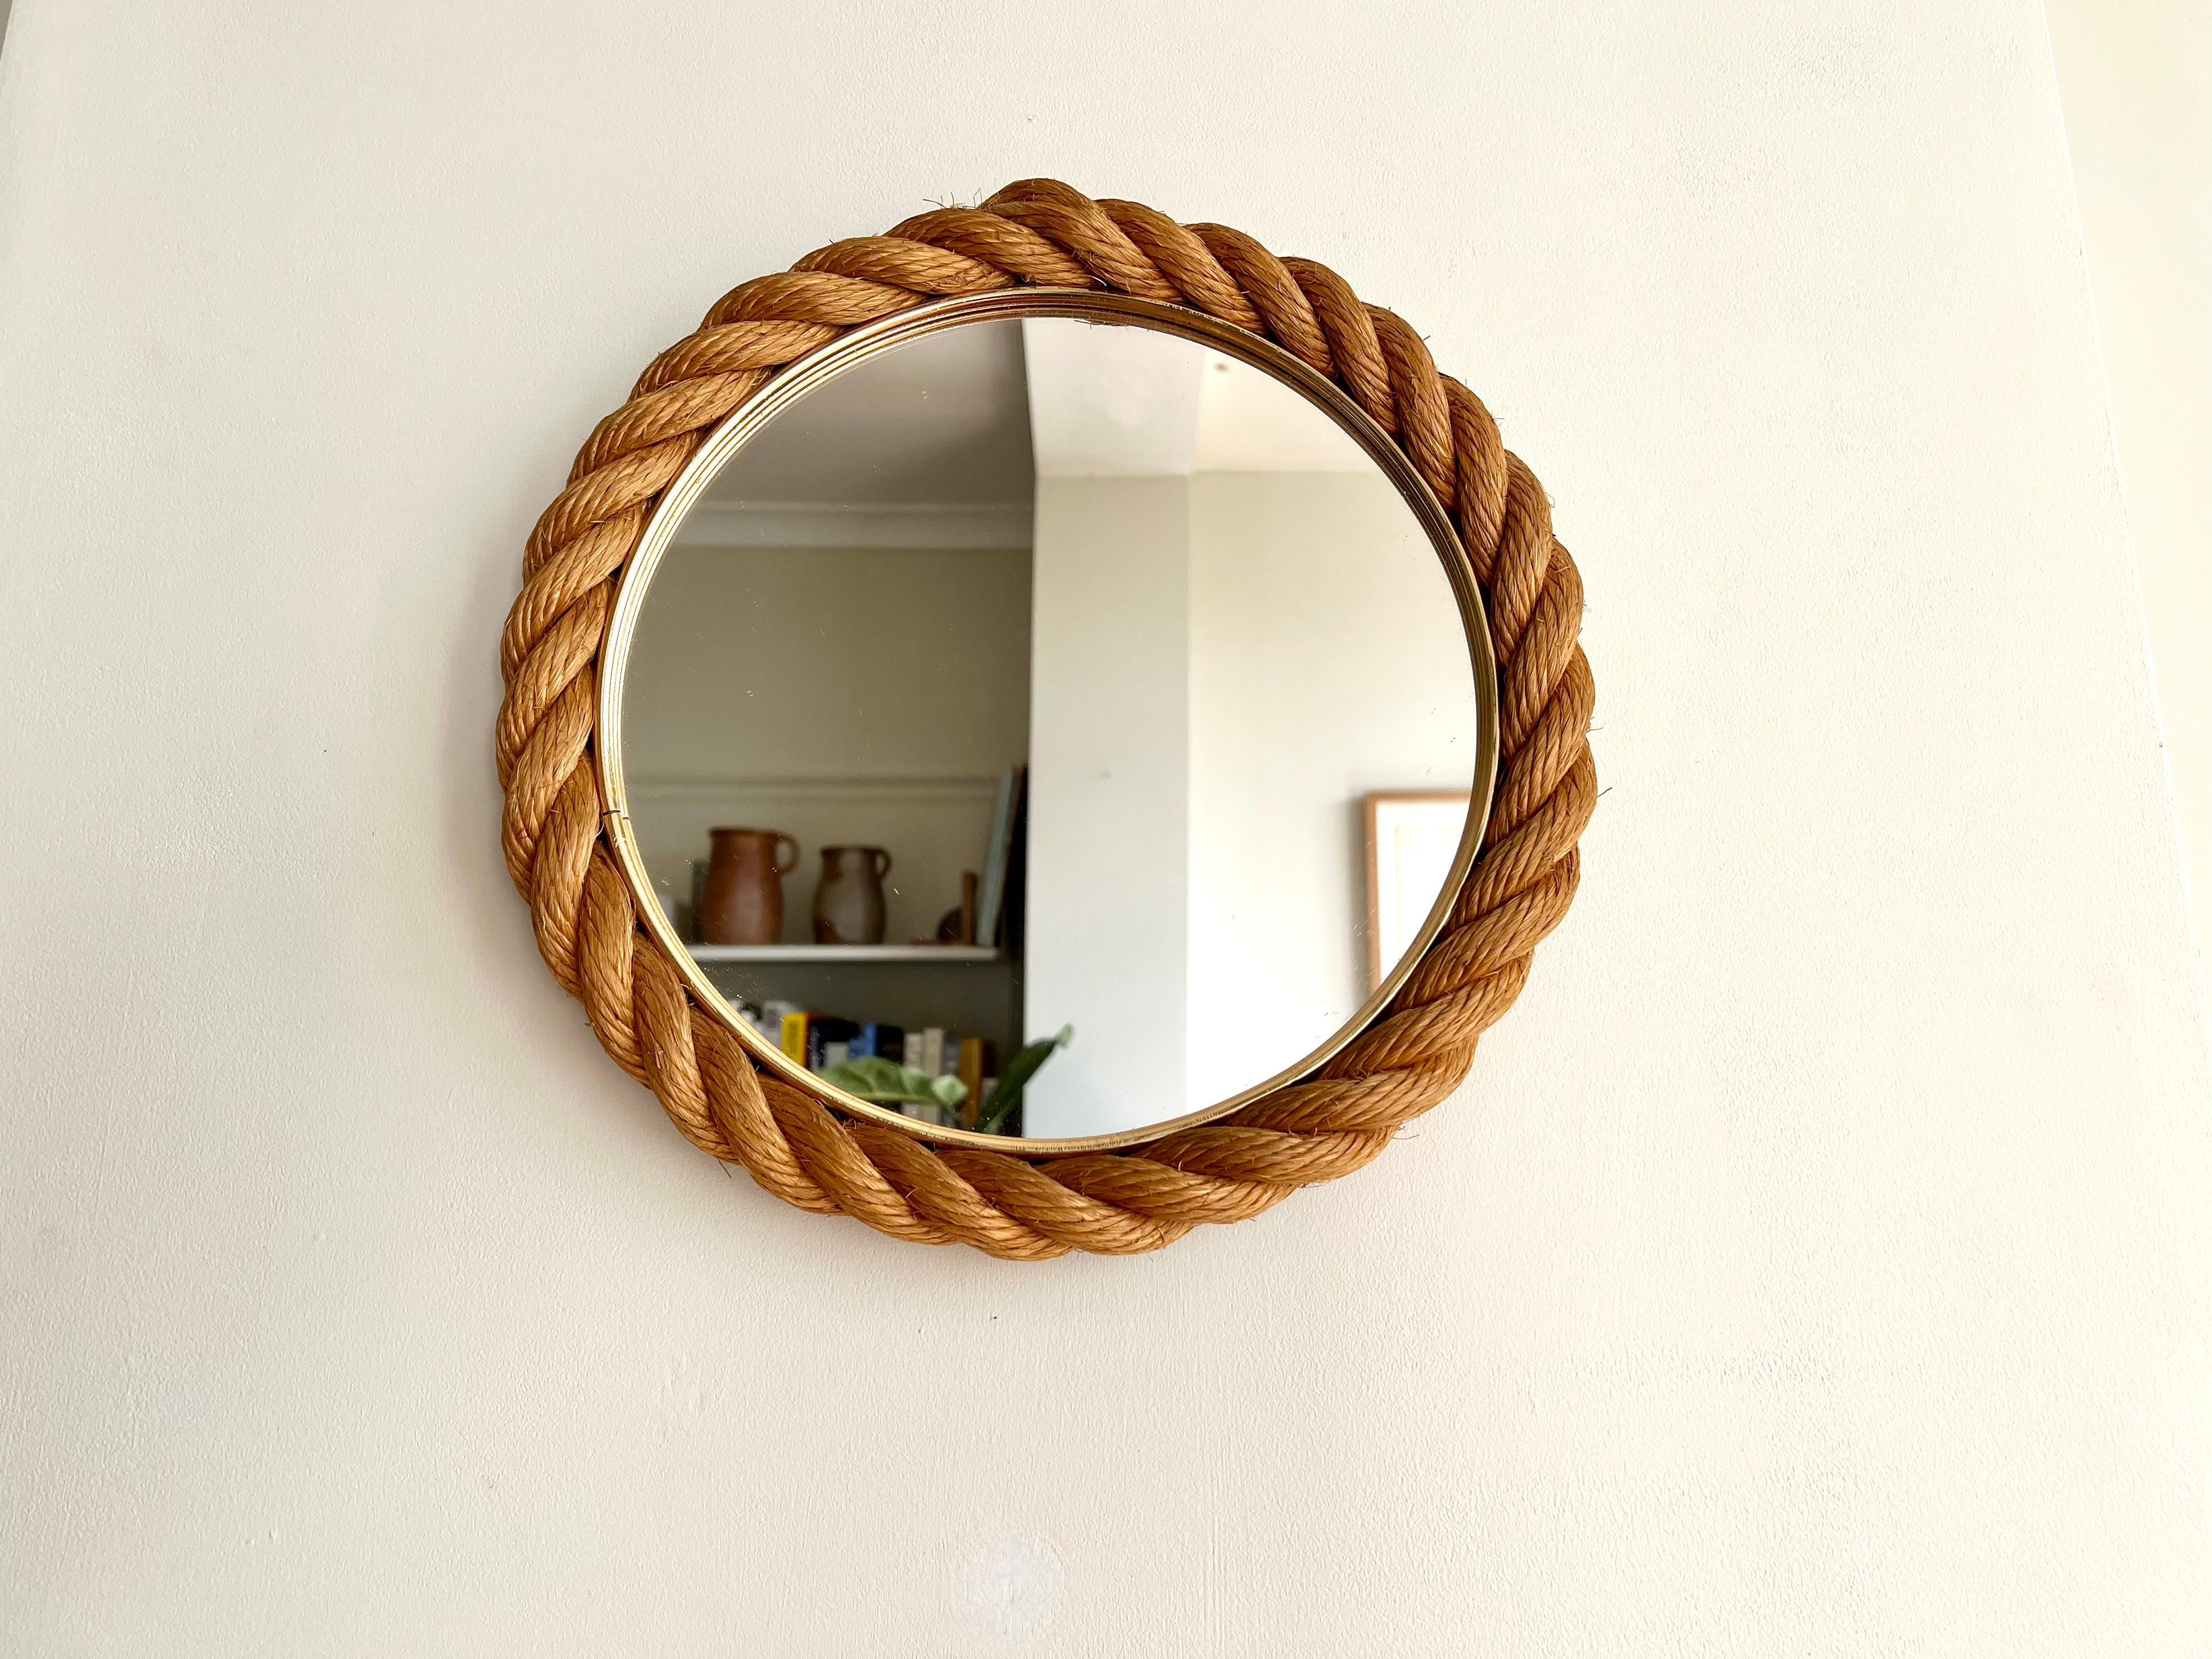 Rope Frame Mirror, Audoux & Minet, France, 1950-1960 For Sale 3